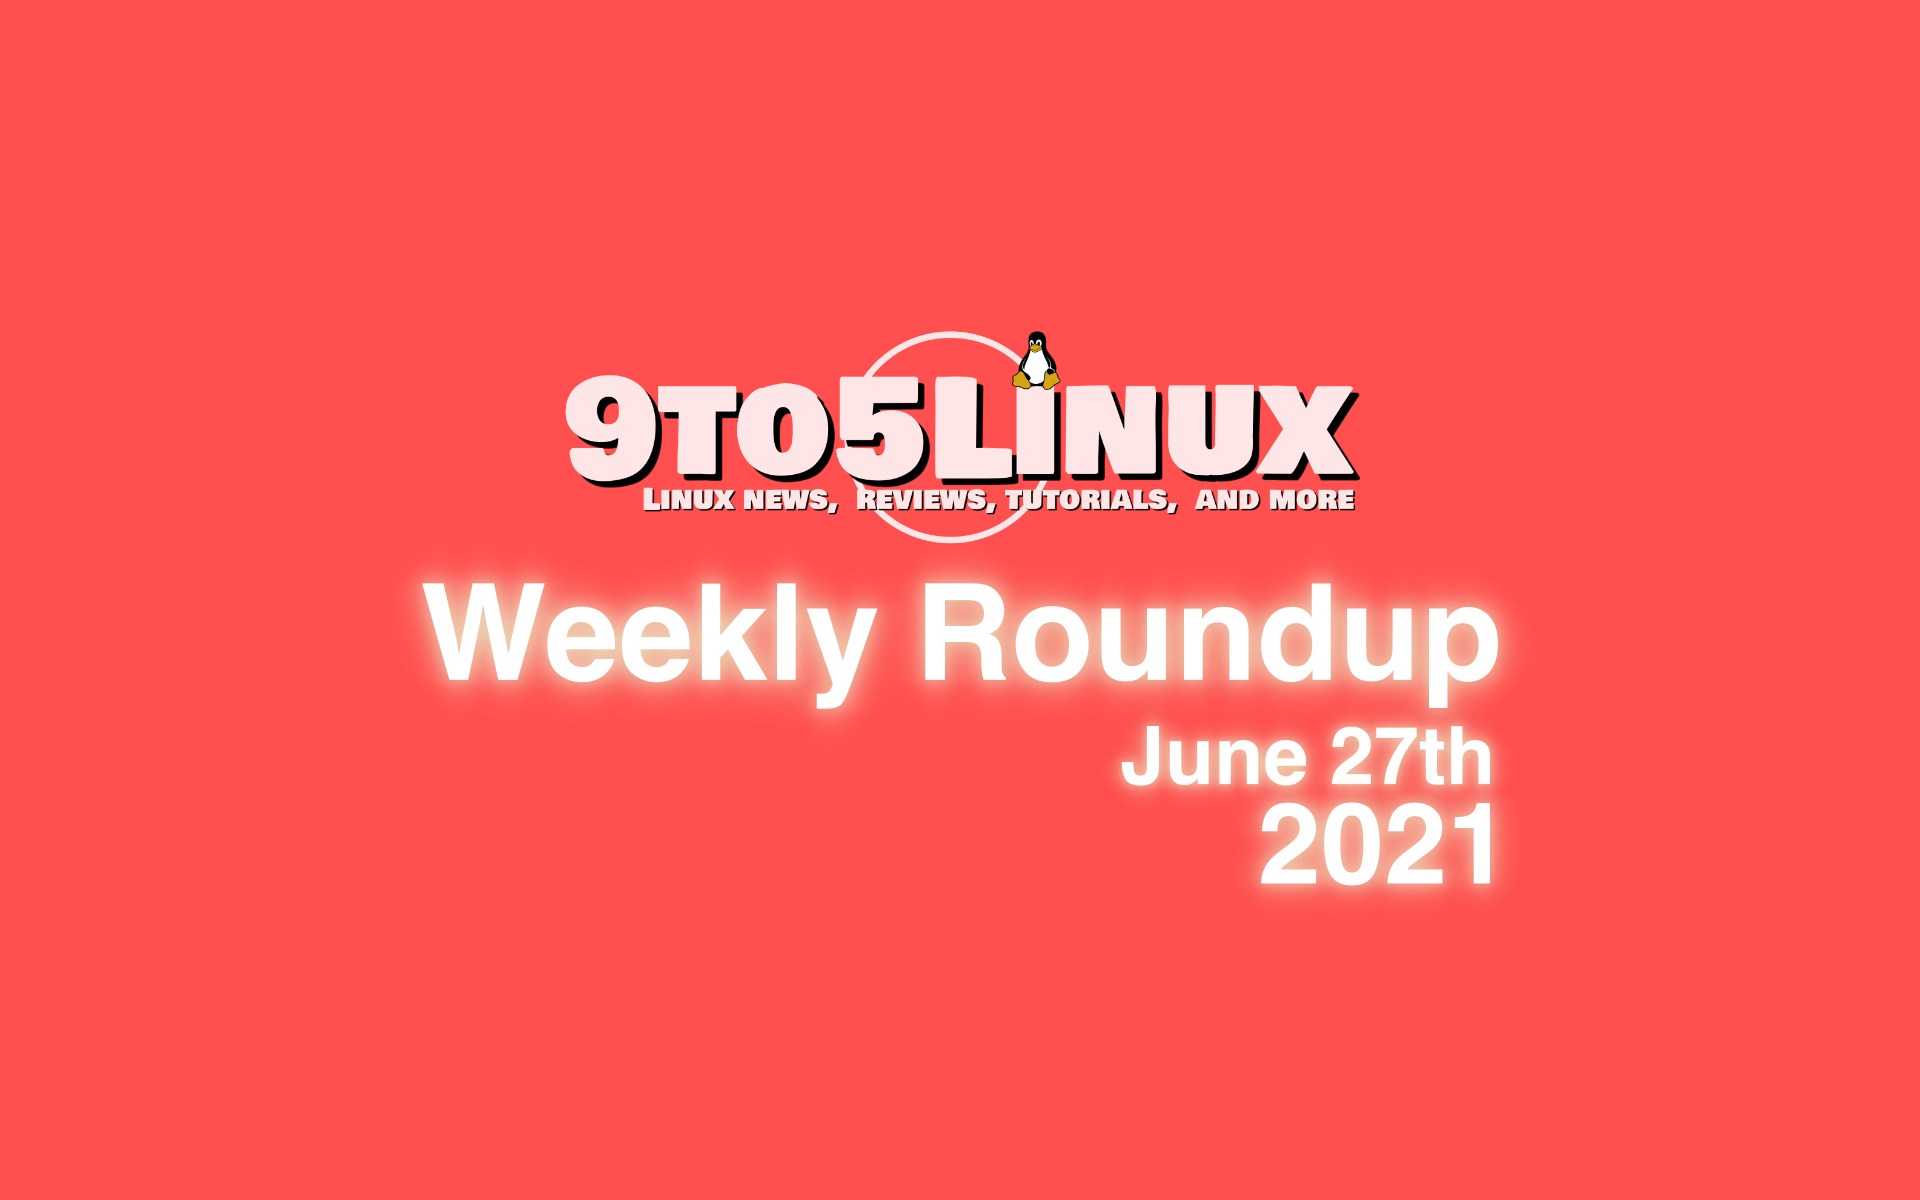 9to5Linux Weekly Roundup: June 27th, 2021